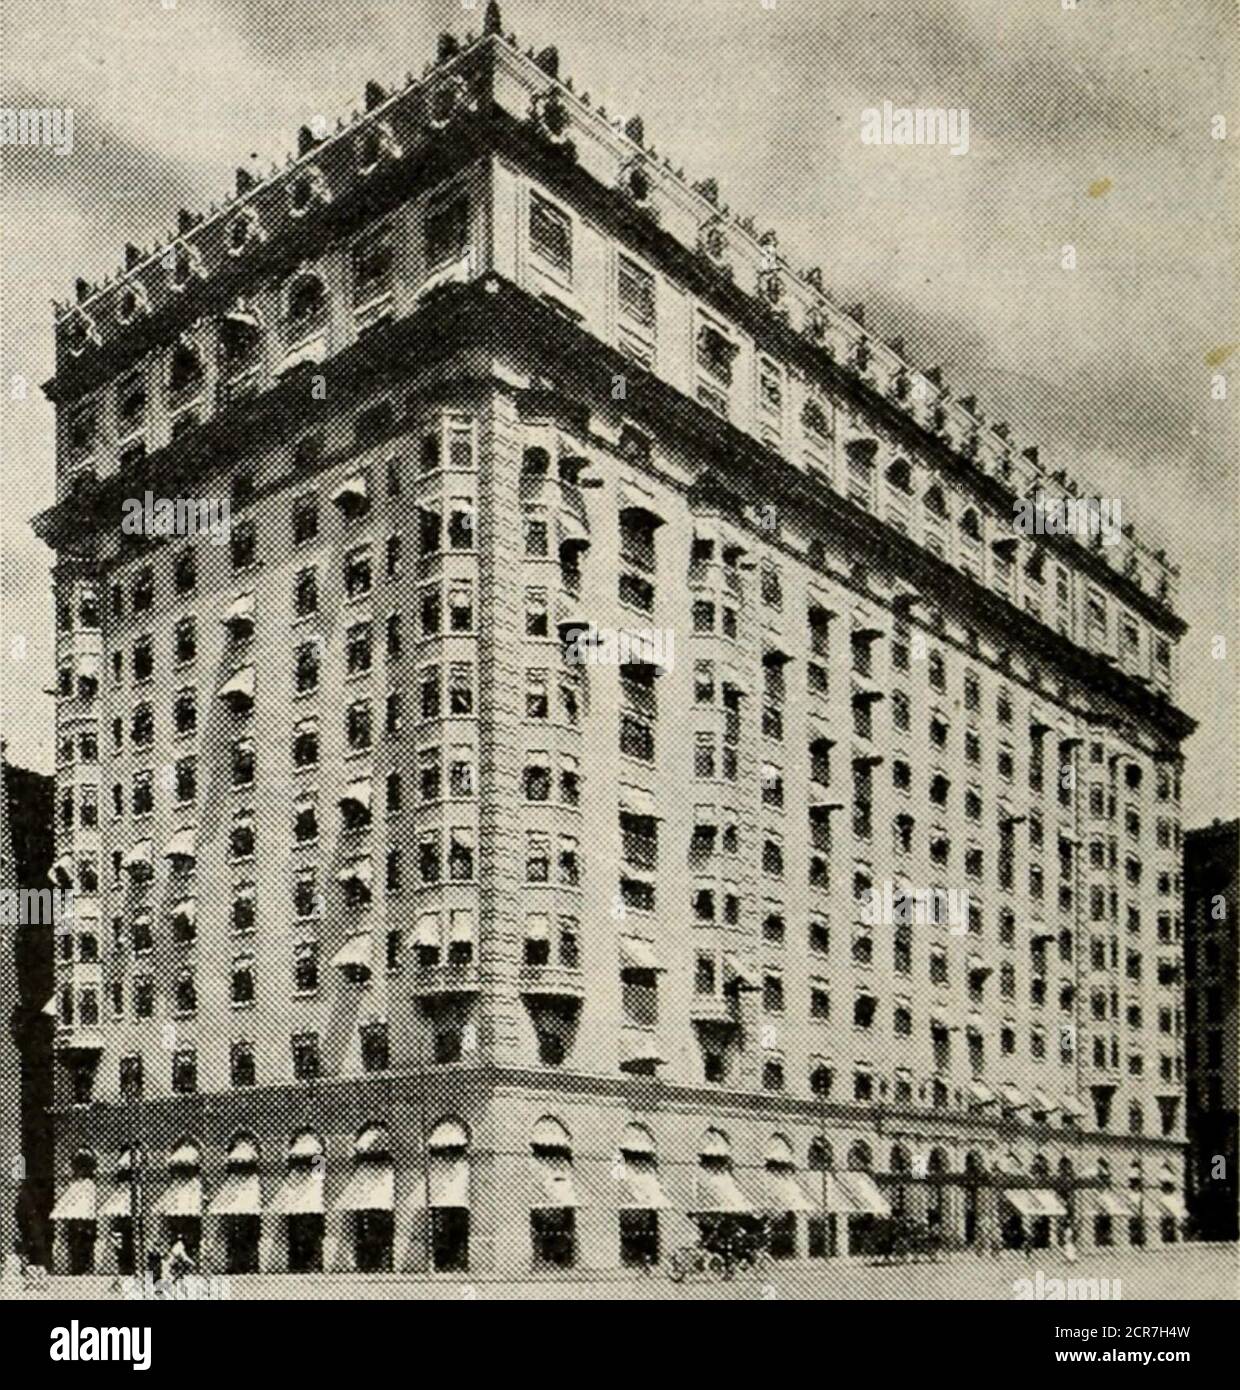 The Official hotel red book and directory . Hall. ST. JOSEPH, * f Buchanan  Co. Pop.77,403. (RR, A. T. & S. Fe.; Burl.;C. Gt. W.; R. I.; Mo. Pac.;  St.Joe.; Gd.